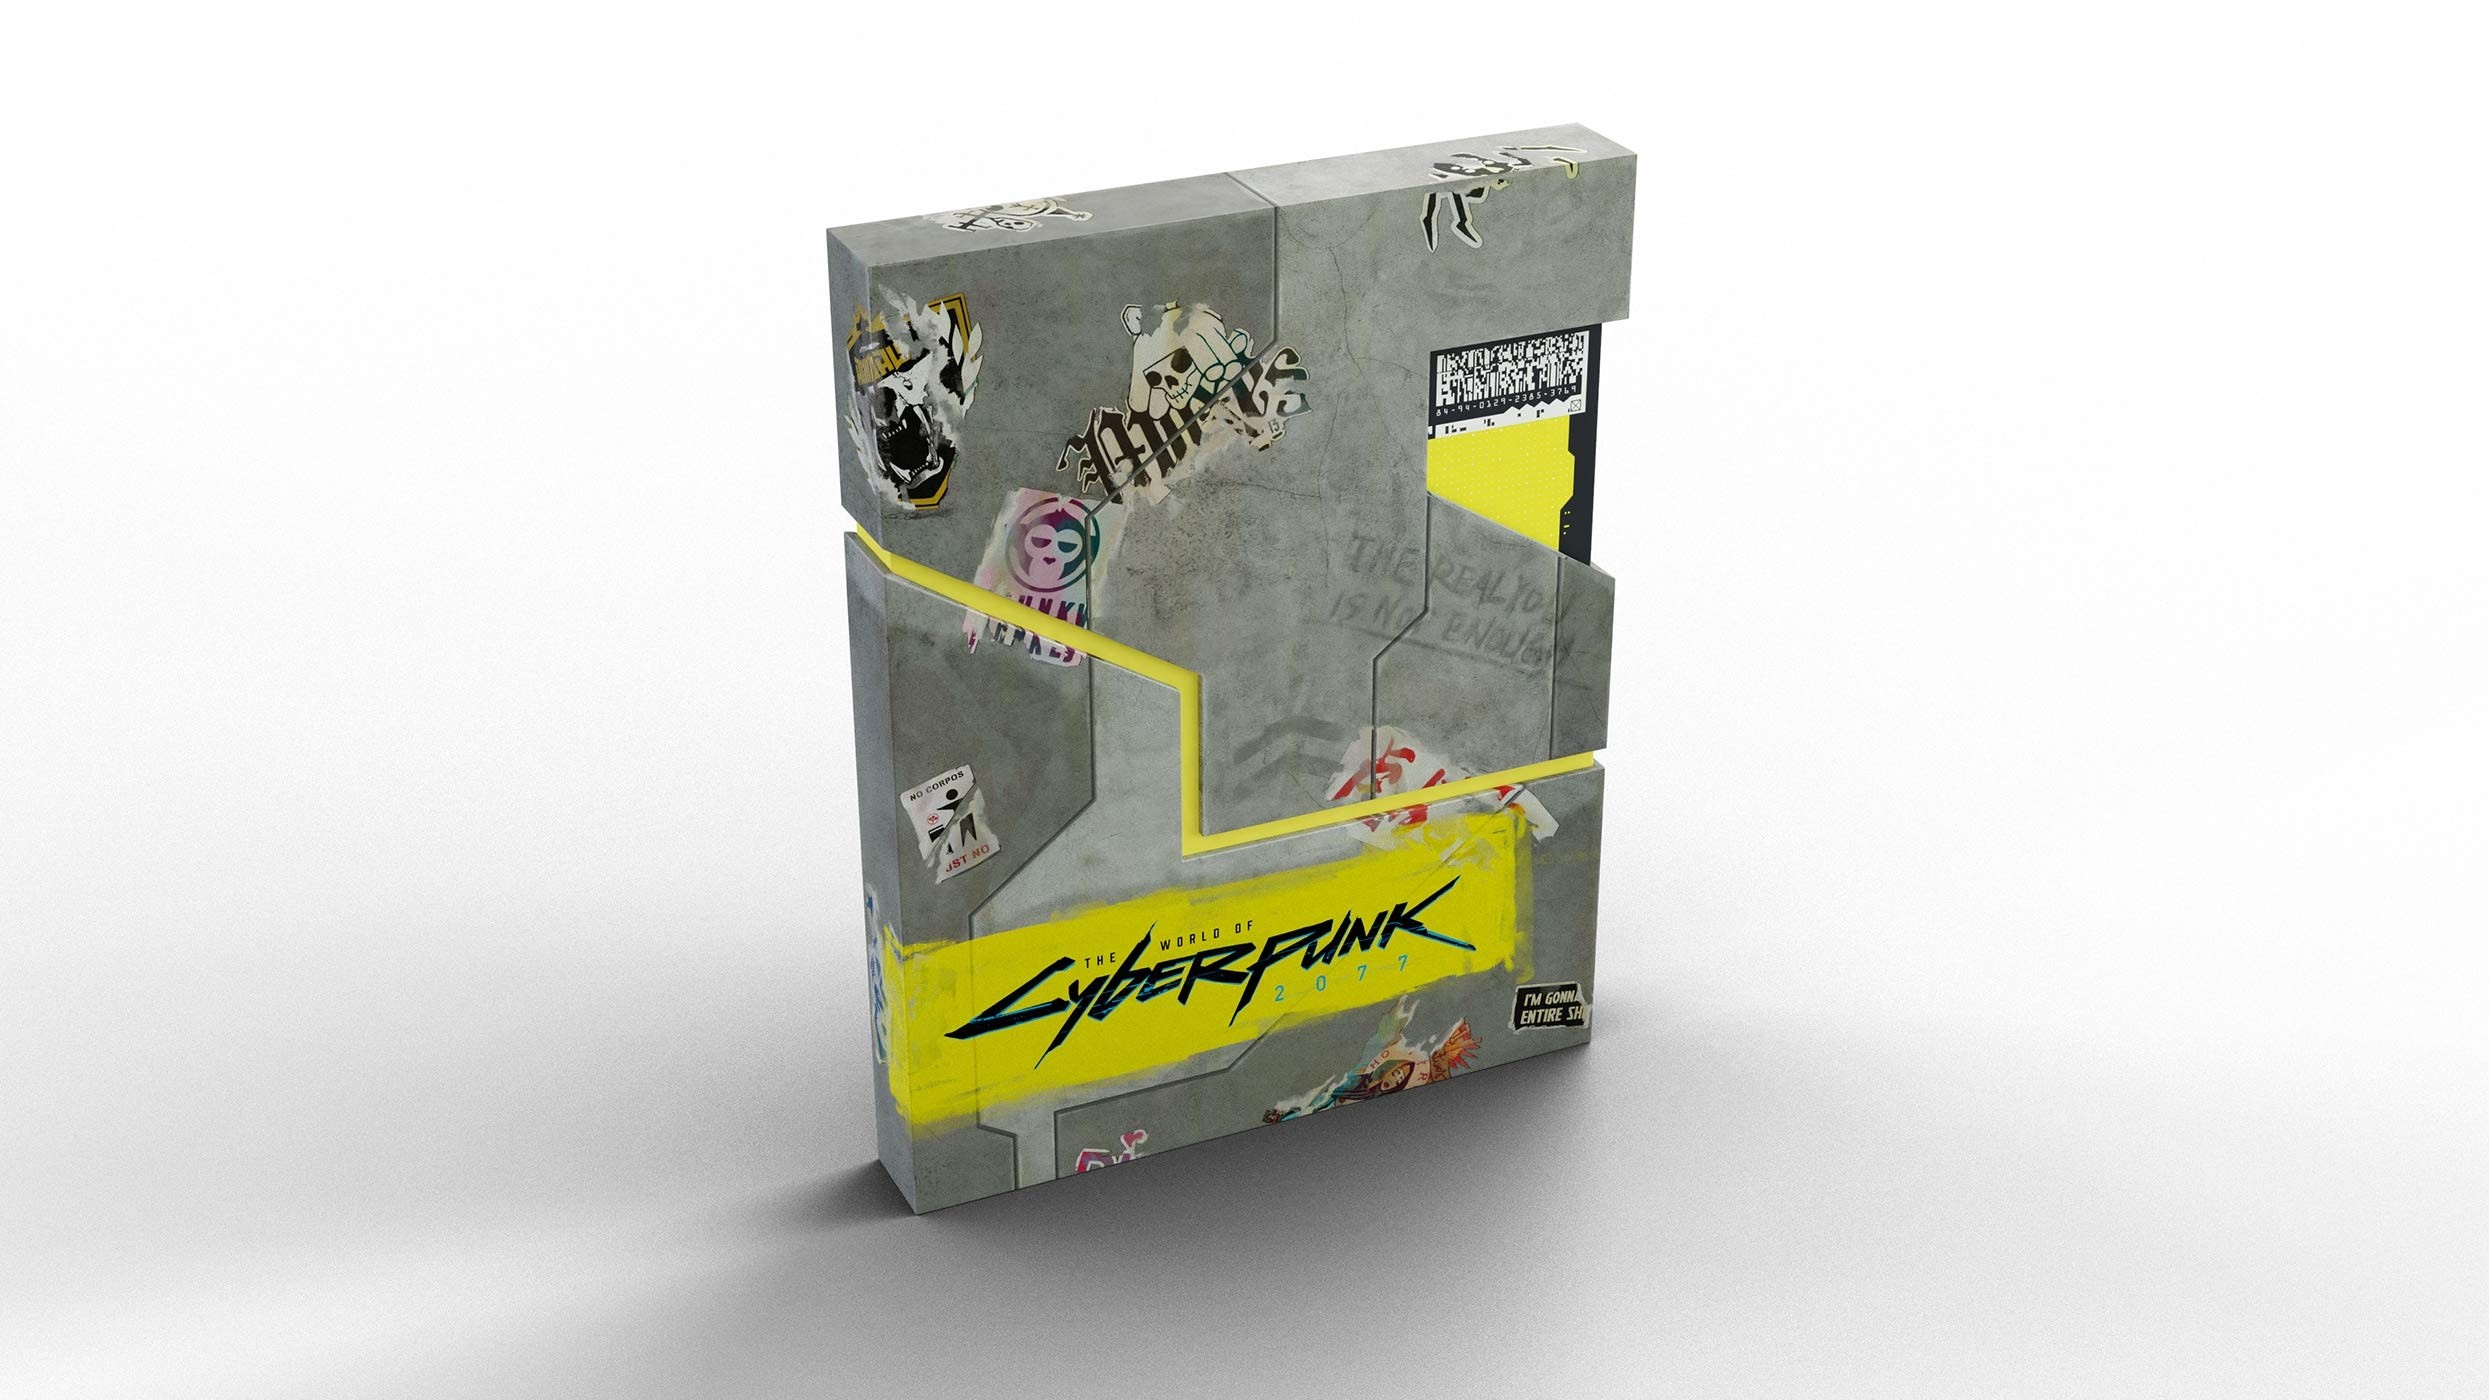 The World of Cyberpunk 2077 Deluxe Edition